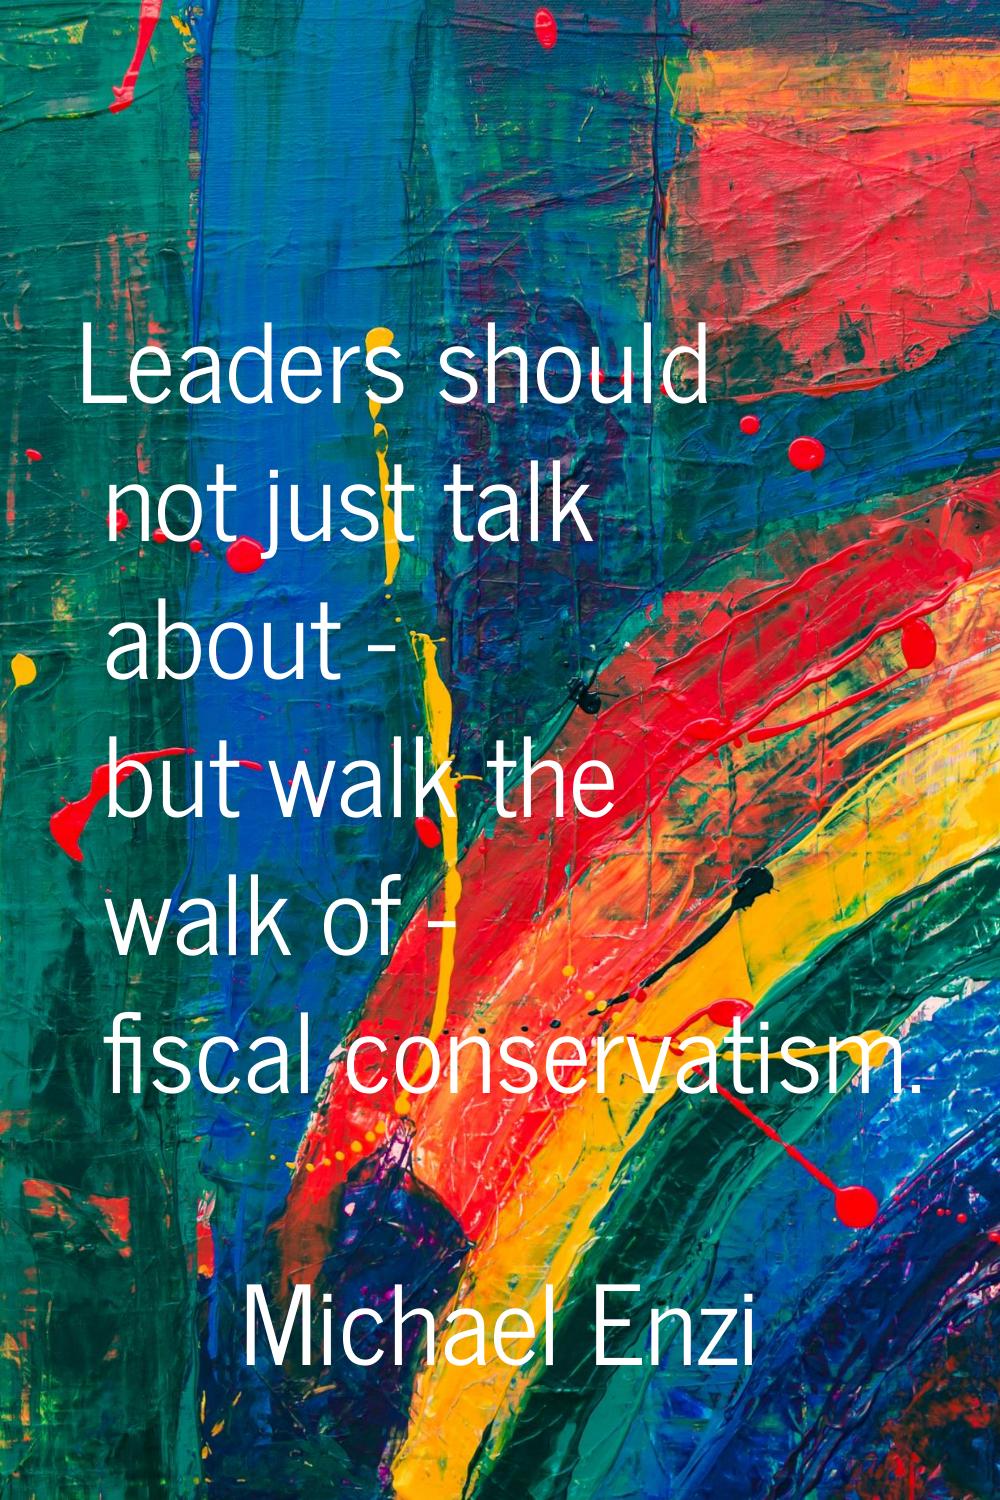 Leaders should not just talk about - but walk the walk of - fiscal conservatism.